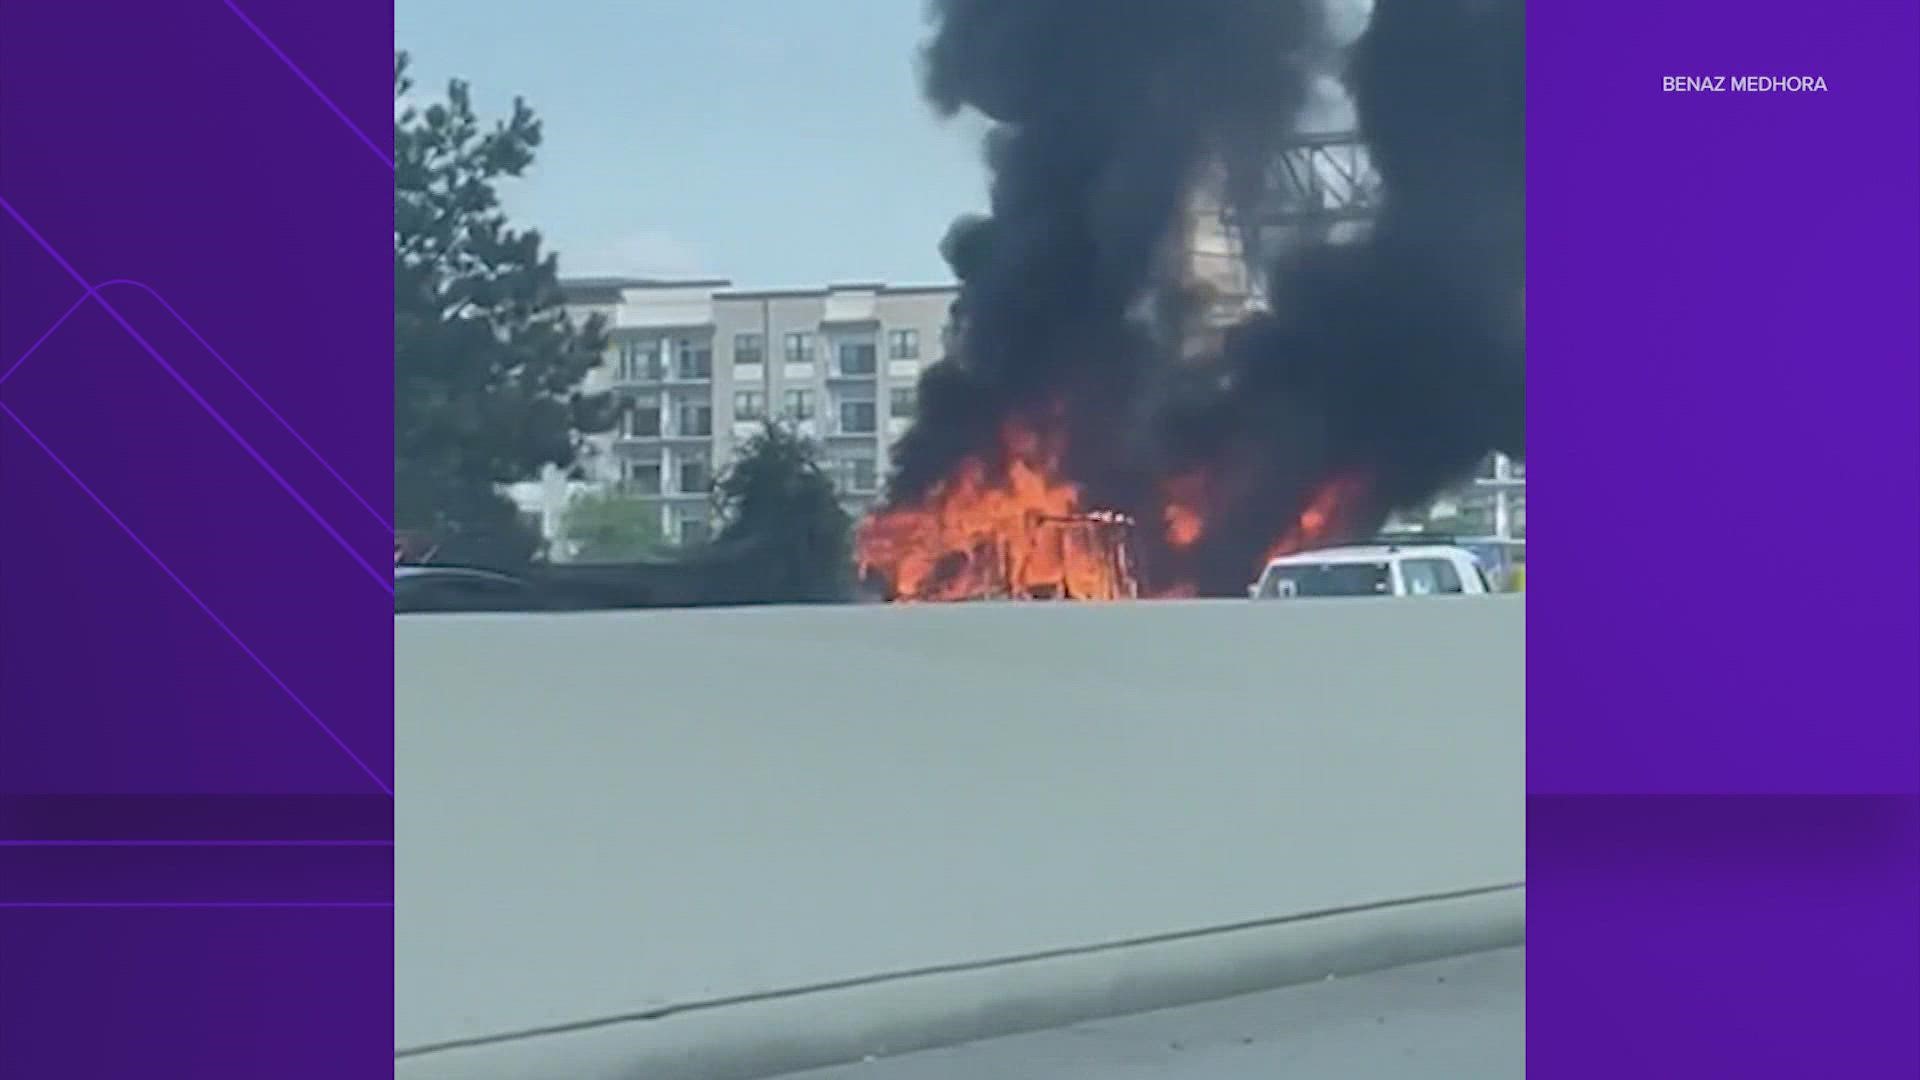 A vehicle on fire shut down several lanes of the I-10/Katy Freeway near Washington. No injuries were reported.